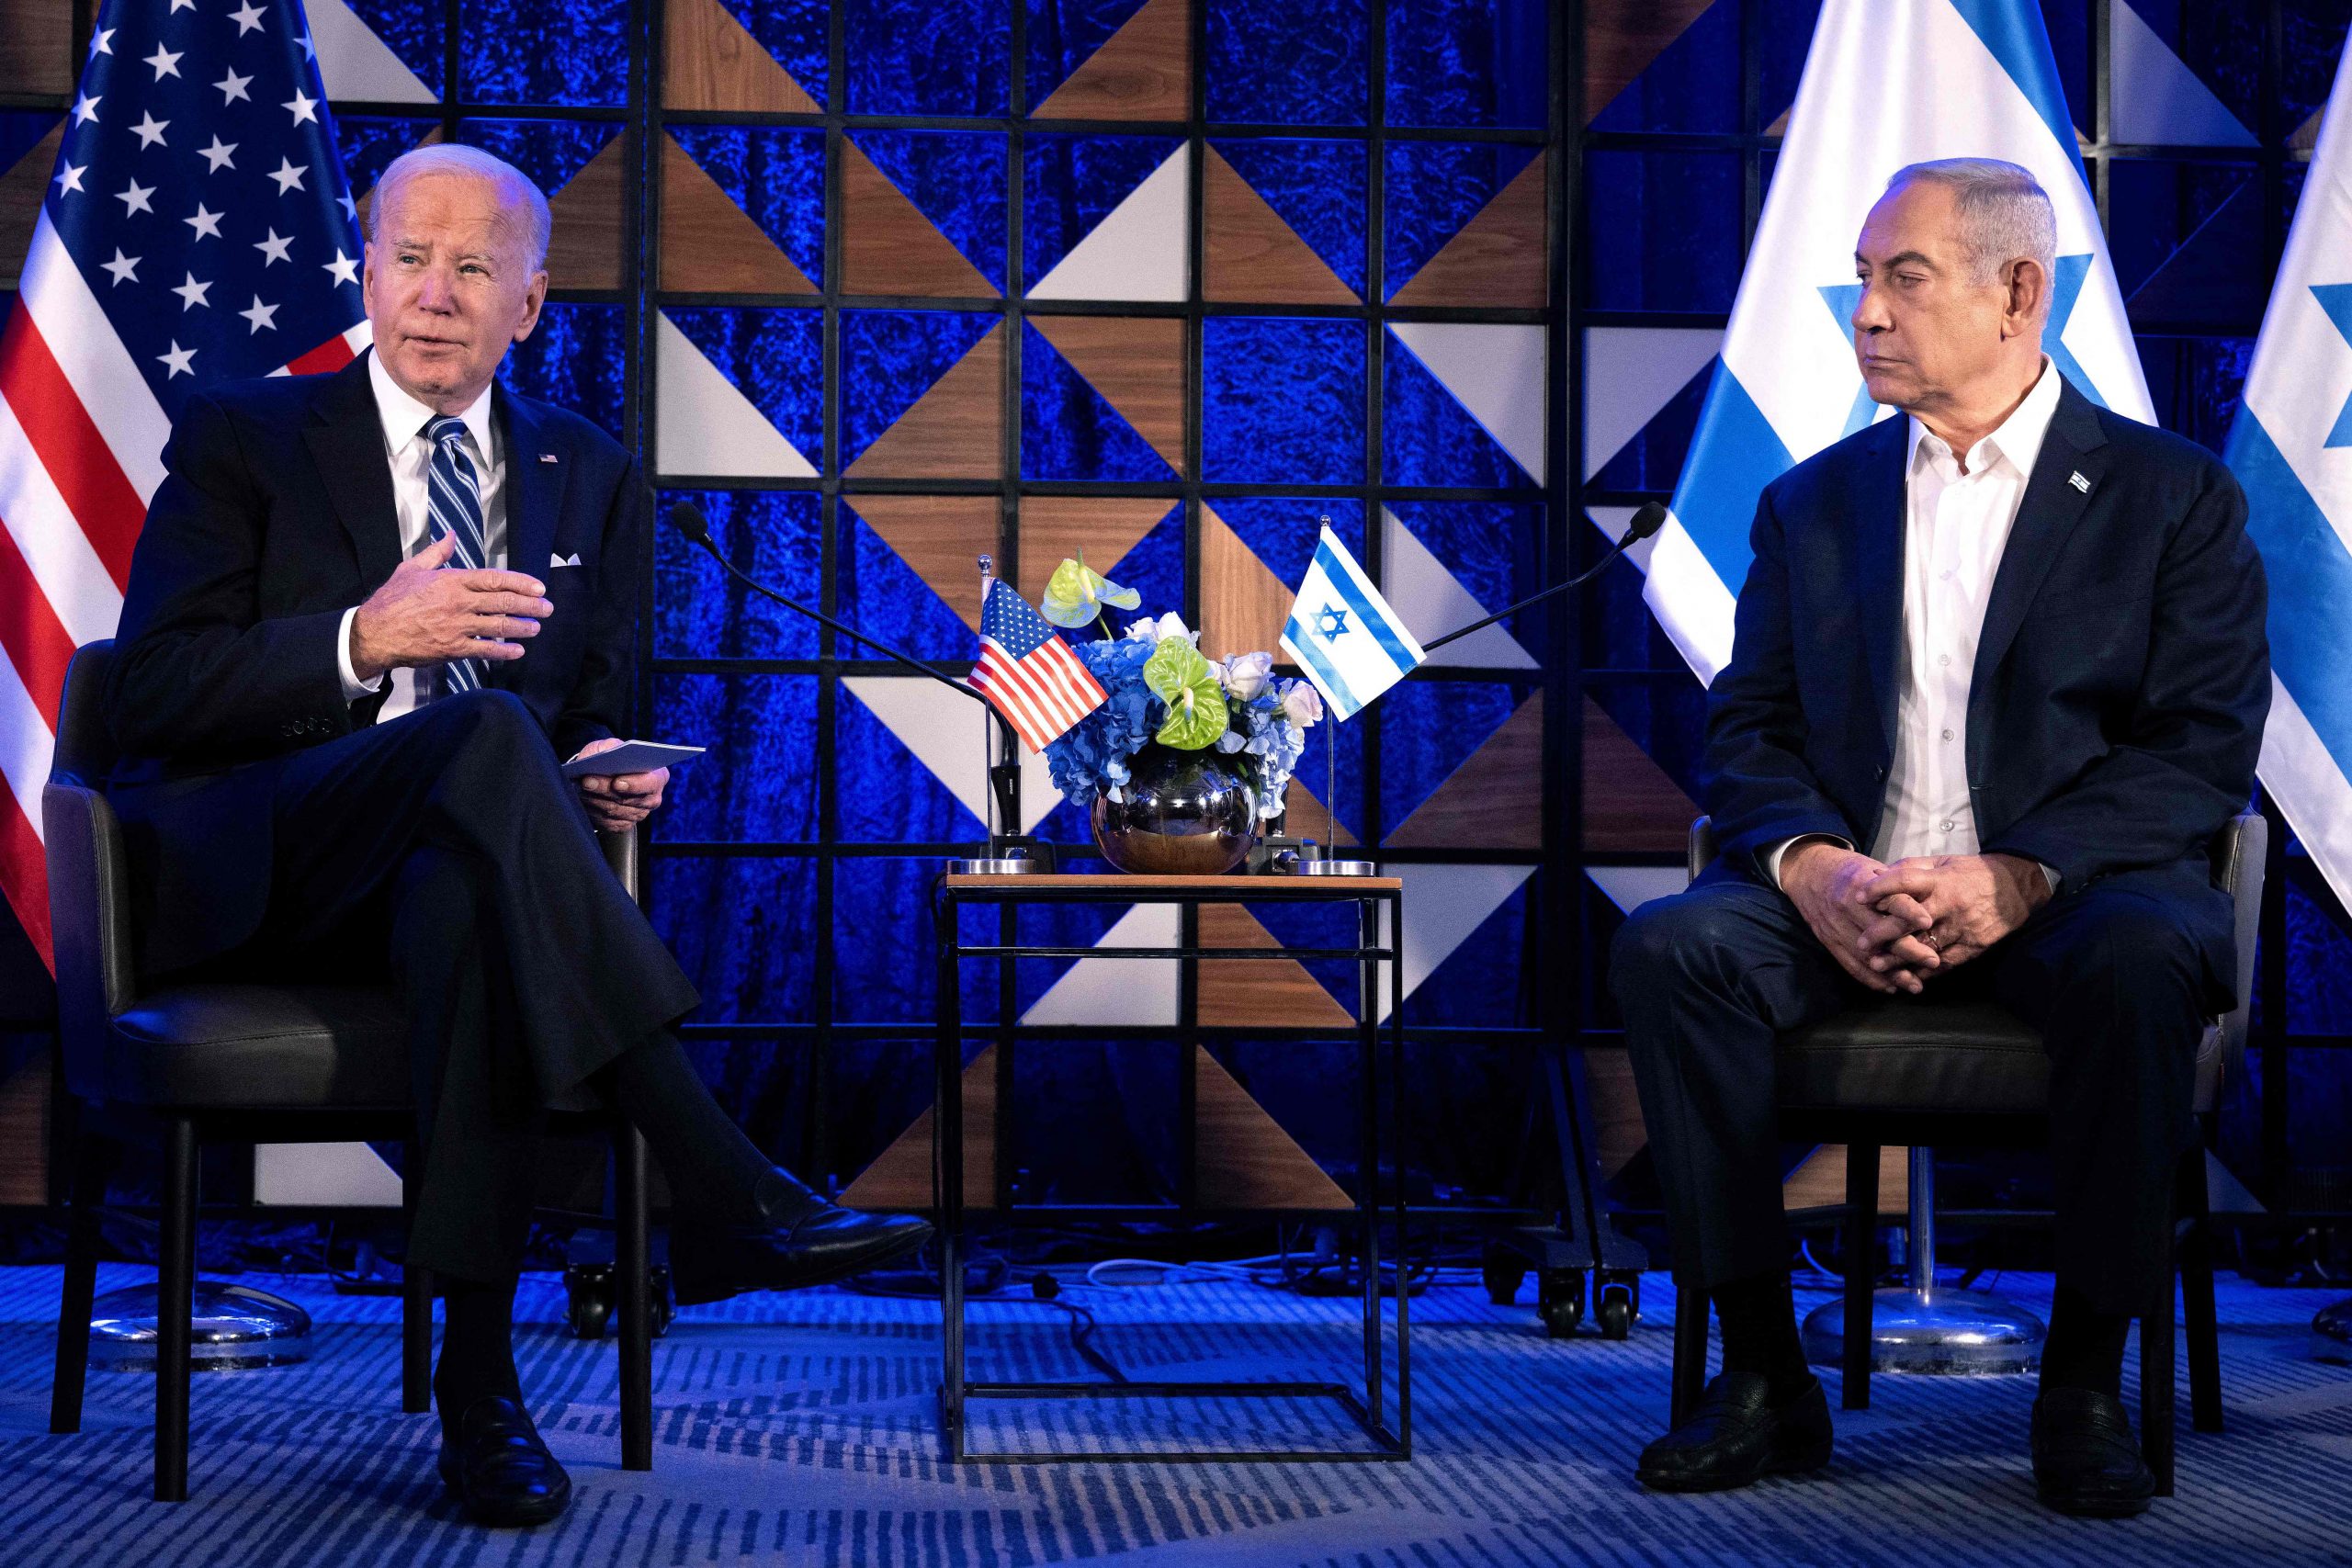 Biden speaks with Netanyahu after almost a month, discusses two-state solution